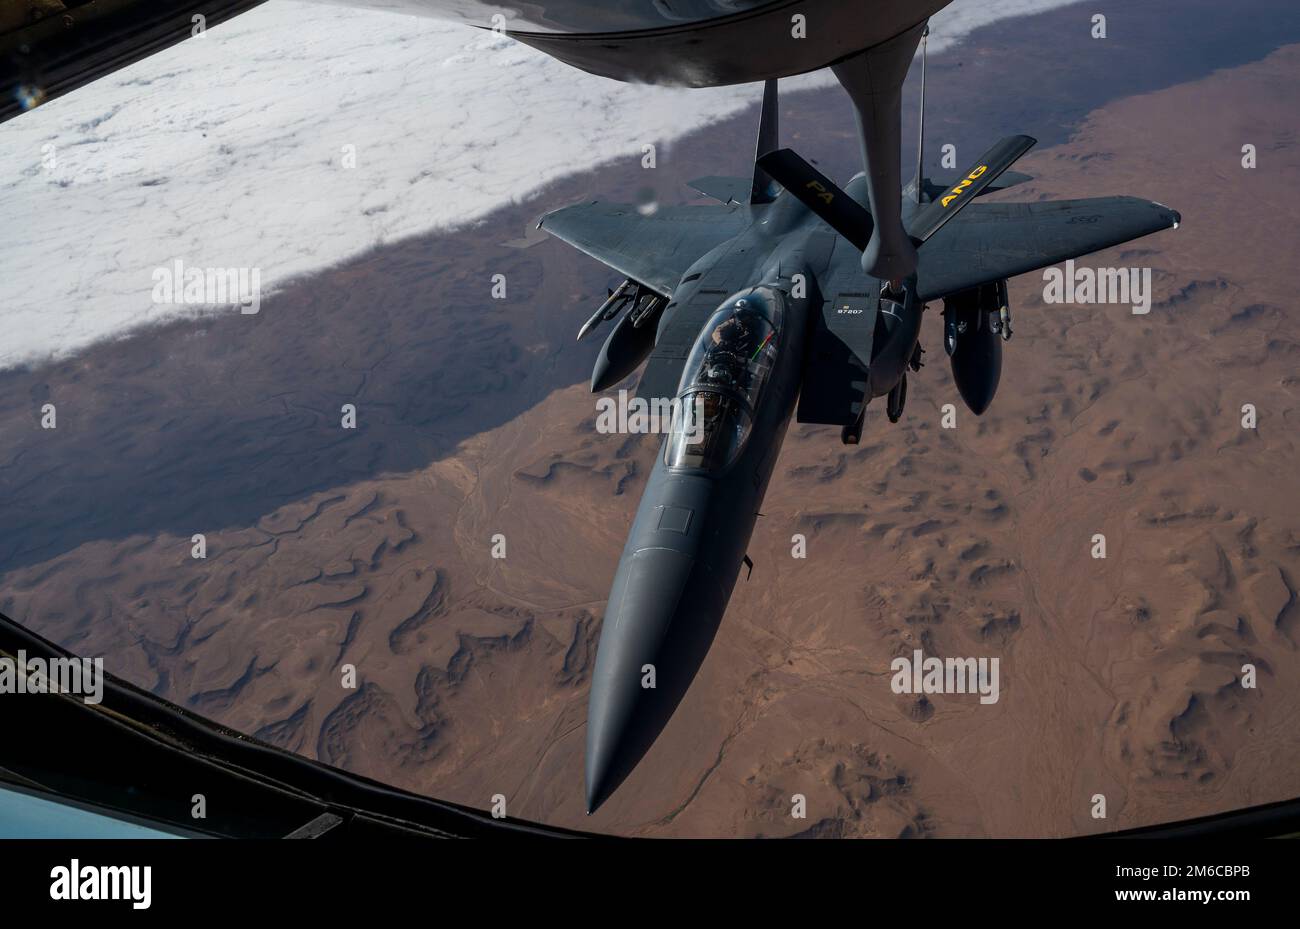 Undisclosed Location, Qatar. 30 December, 2022. A U.S. Air Force F-15 Strike Eagle fighter aircraft refuels from a KC-135 Stratotanker aircraft over U.S. Central Command area of responsibility, December 30, 2022 over Qatar. Credit: SSgt. Kirby Turbak/U.S. Air Force/Alamy Live News Stock Photo